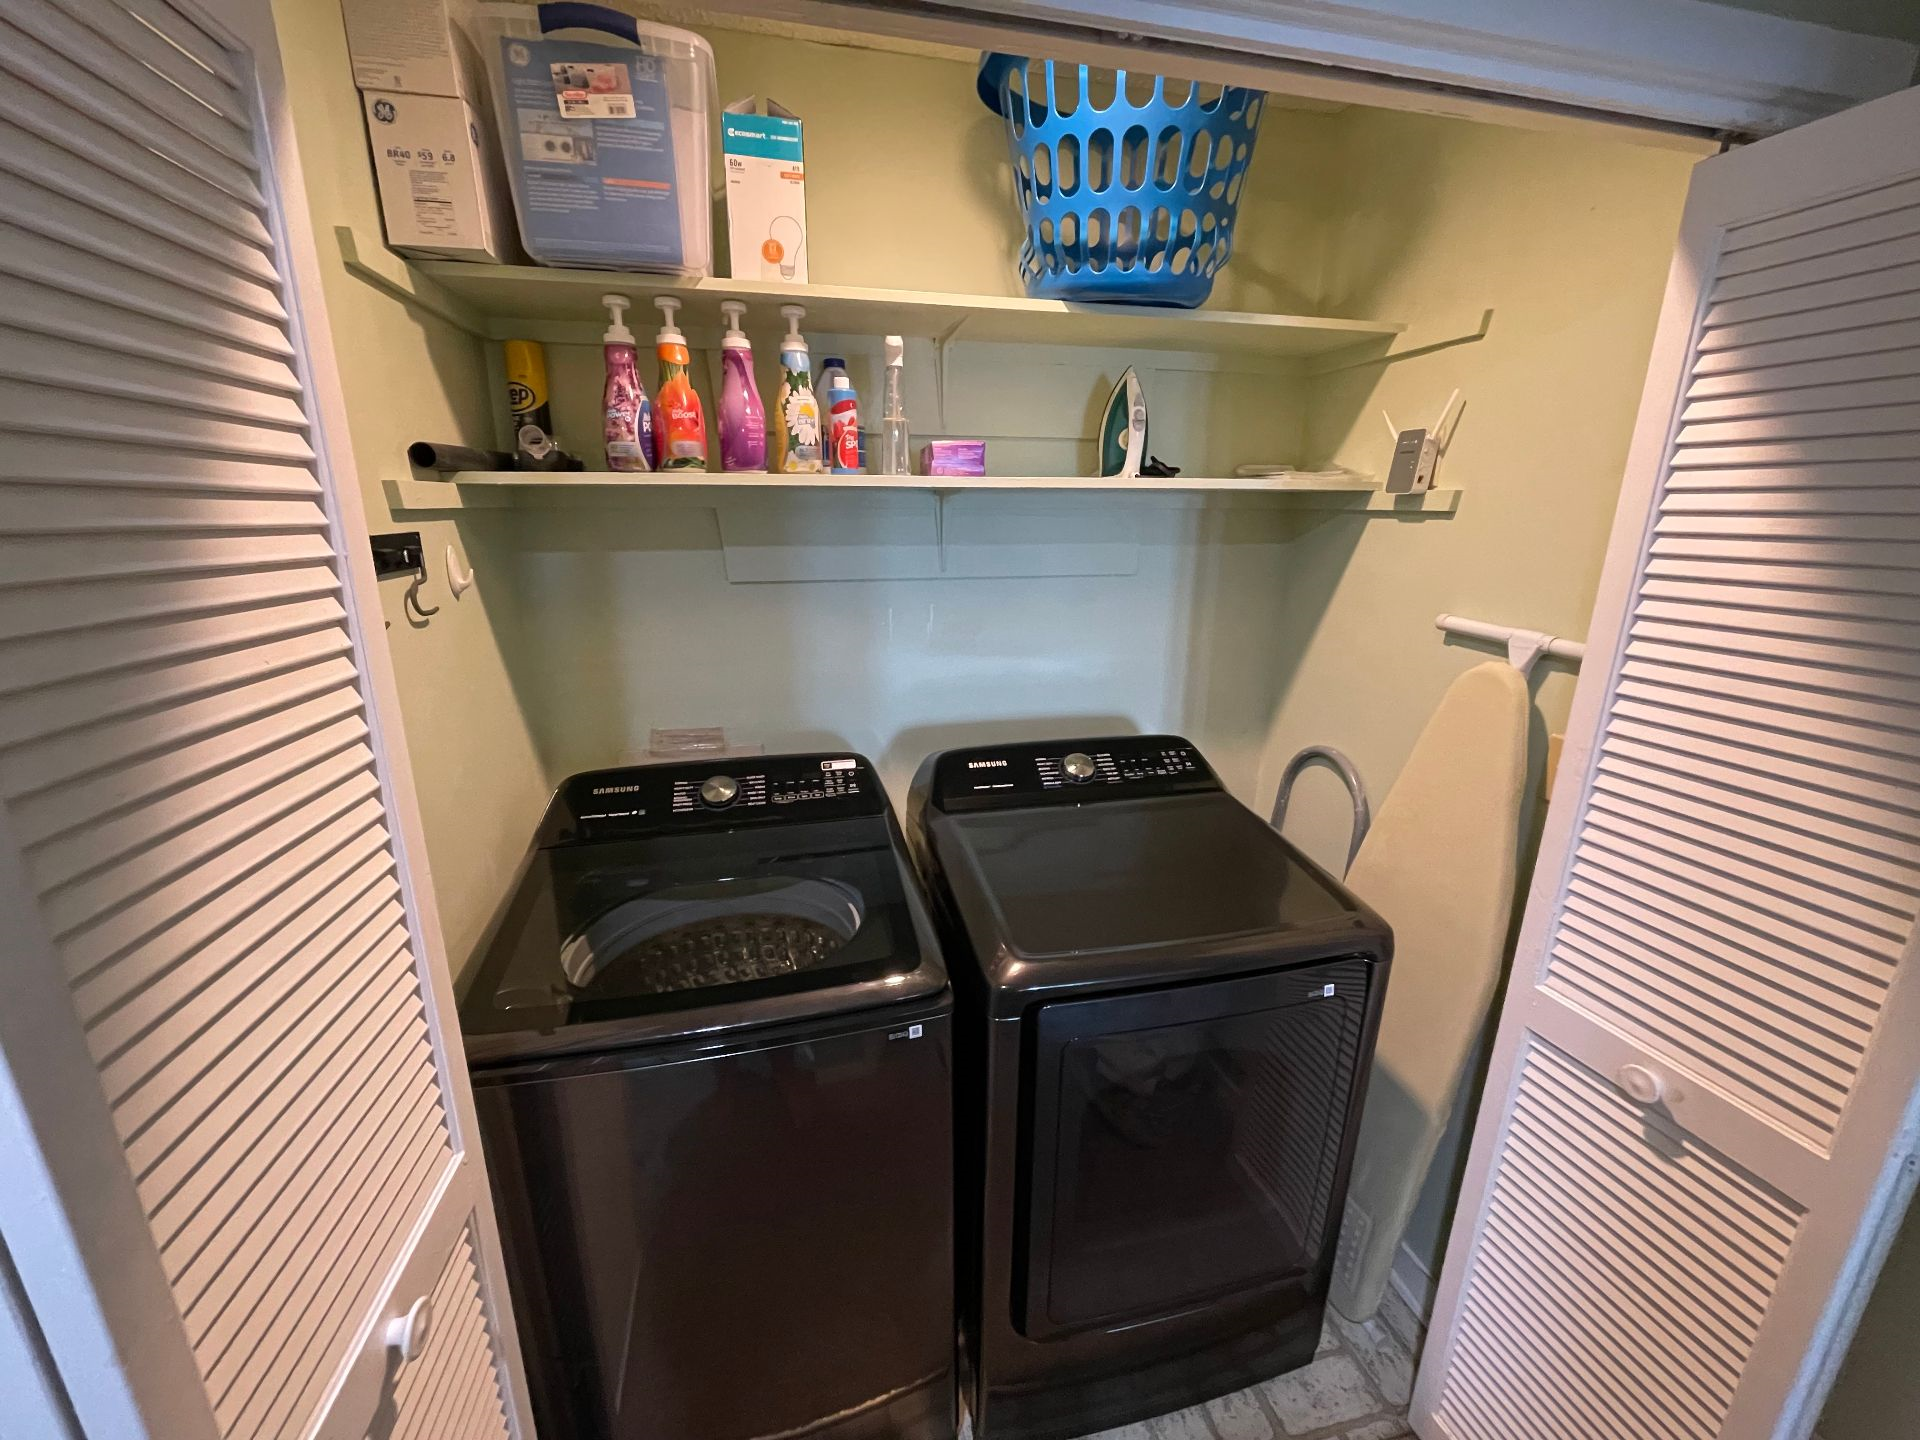 NEW high end washer and dryer - Laundry room fully stocked with all supplies you need!